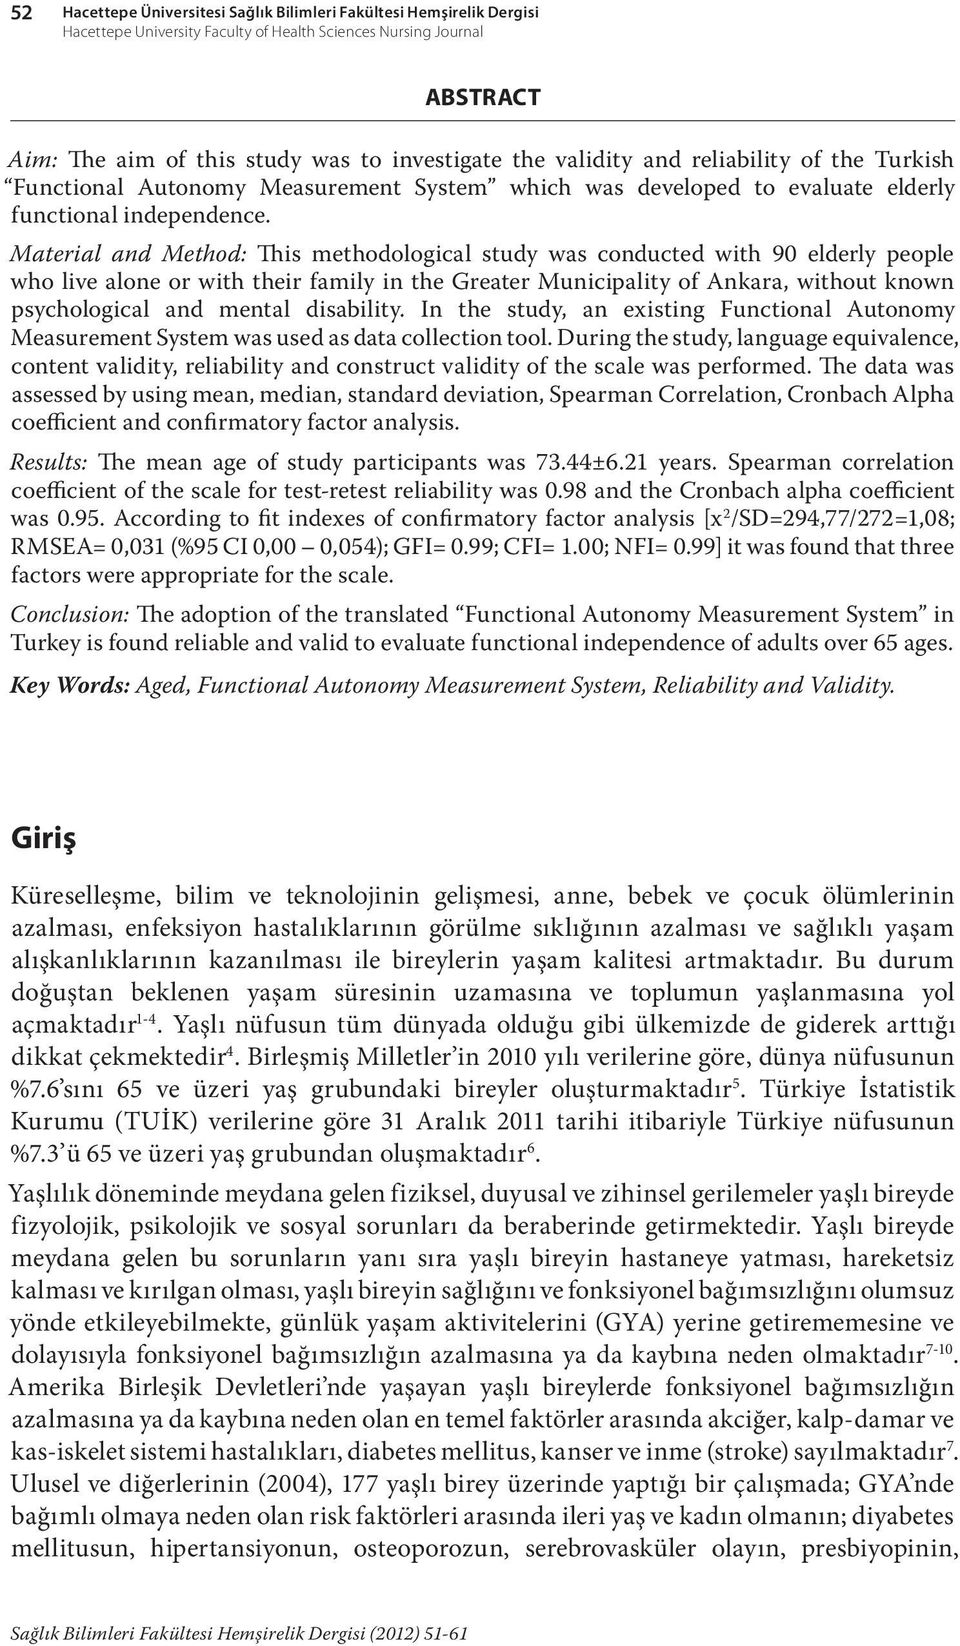 Material and Method: This methodological study was conducted with 90 elderly people who live alone or with their family in the Greater Municipality of Ankara, without known psychological and mental